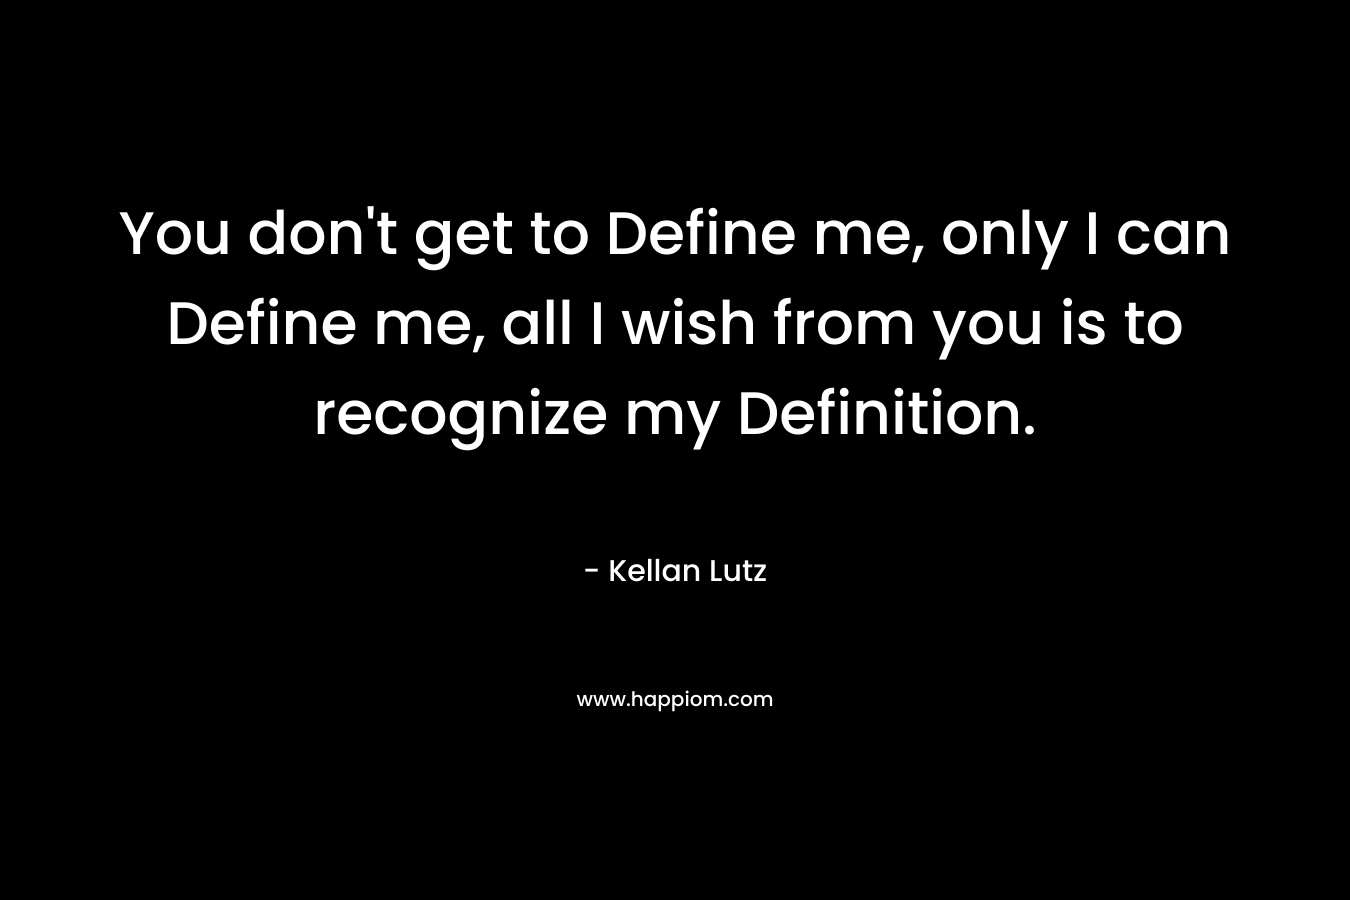 You don't get to Define me, only I can Define me, all I wish from you is to recognize my Definition.